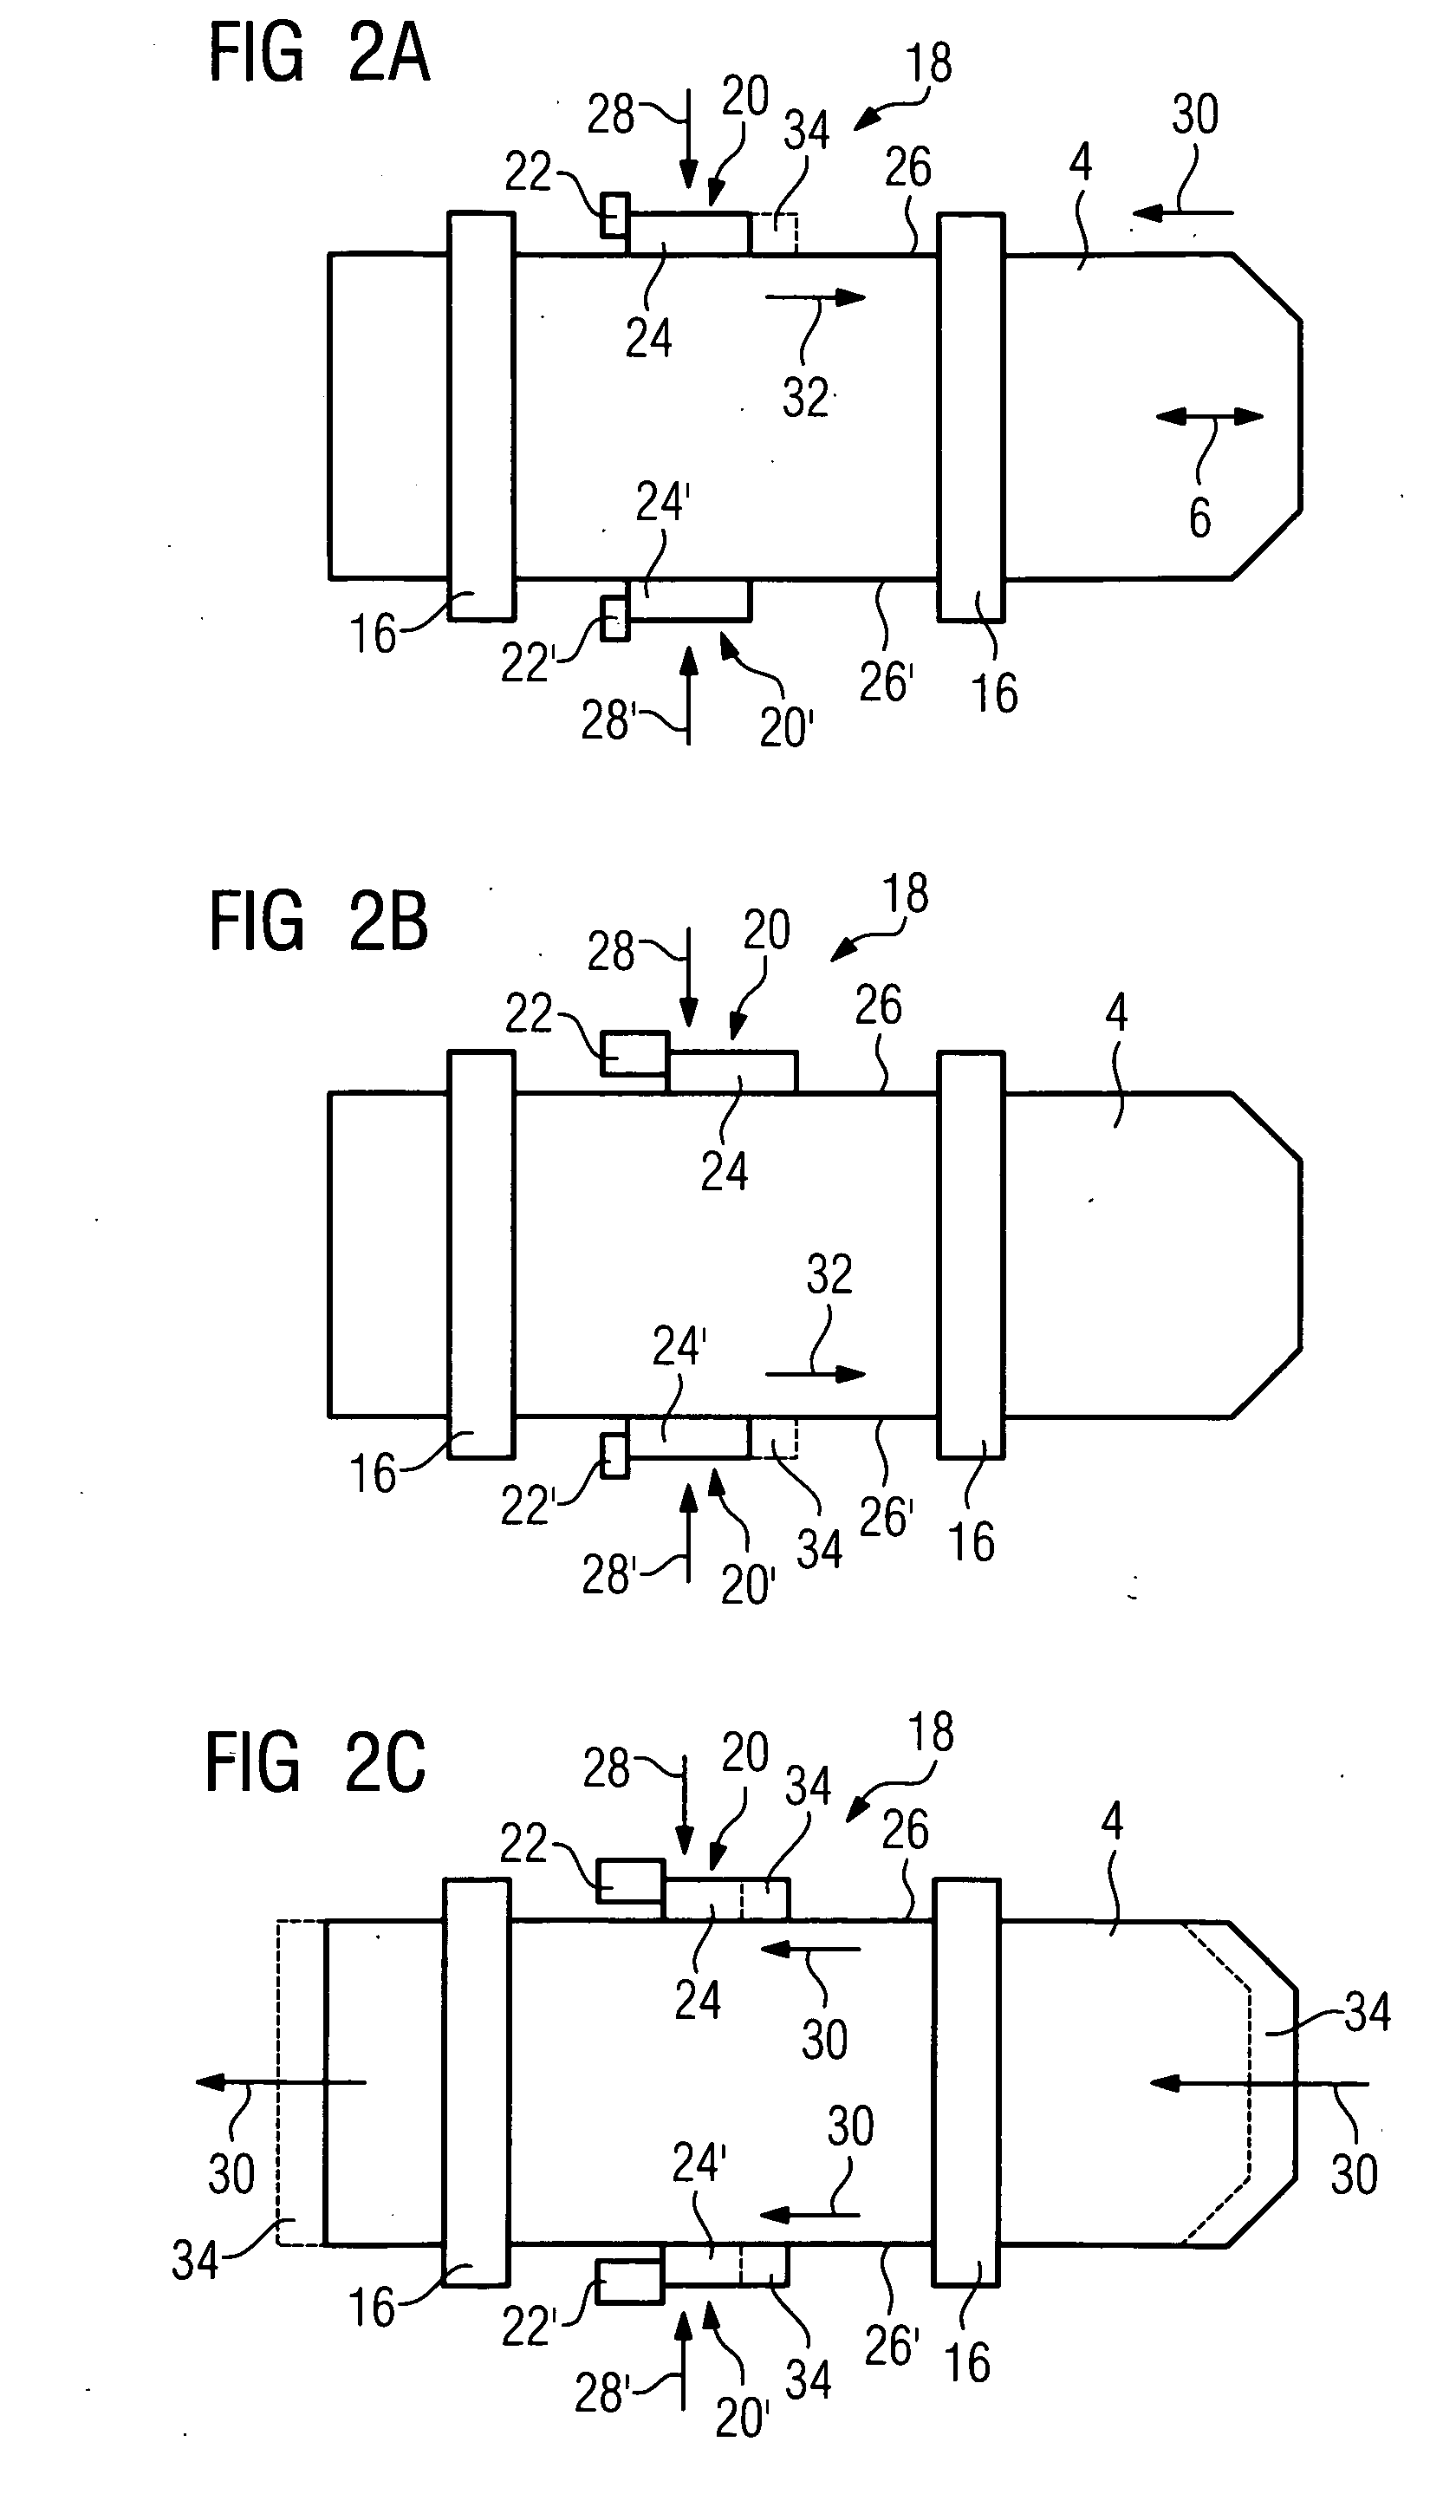 Multileaf collimator and radiation therapy device